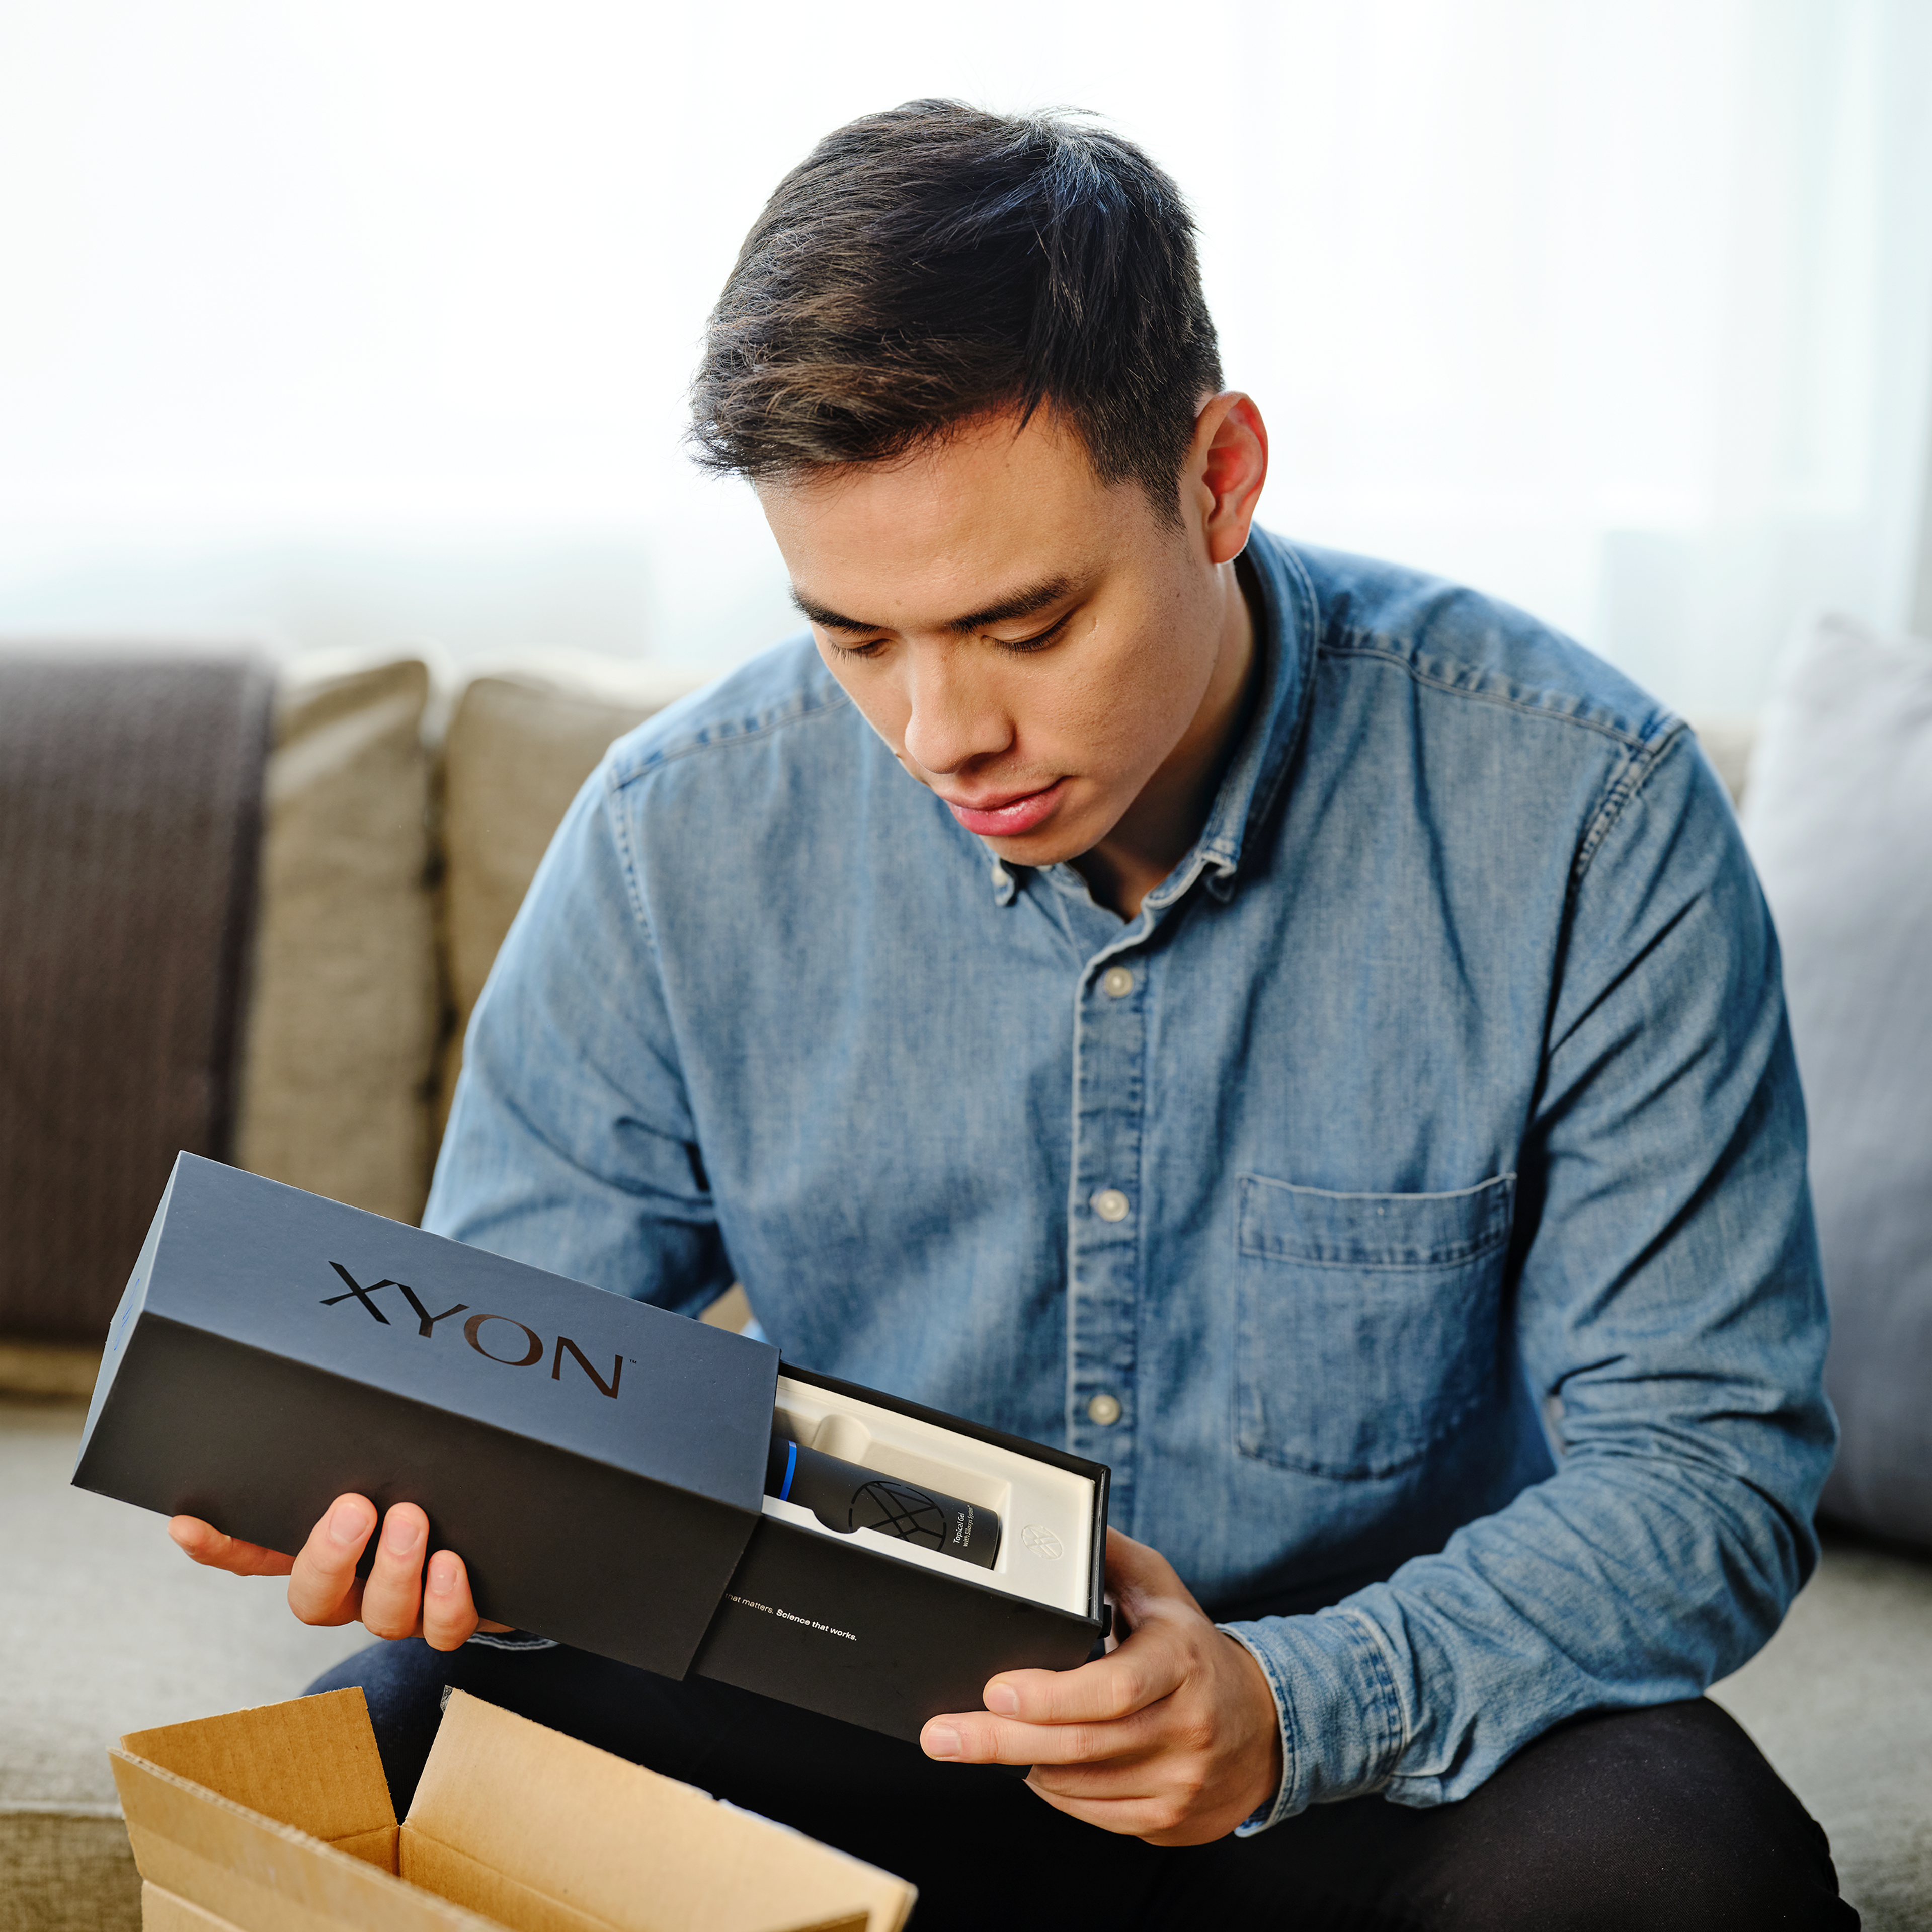 Man opening package of products